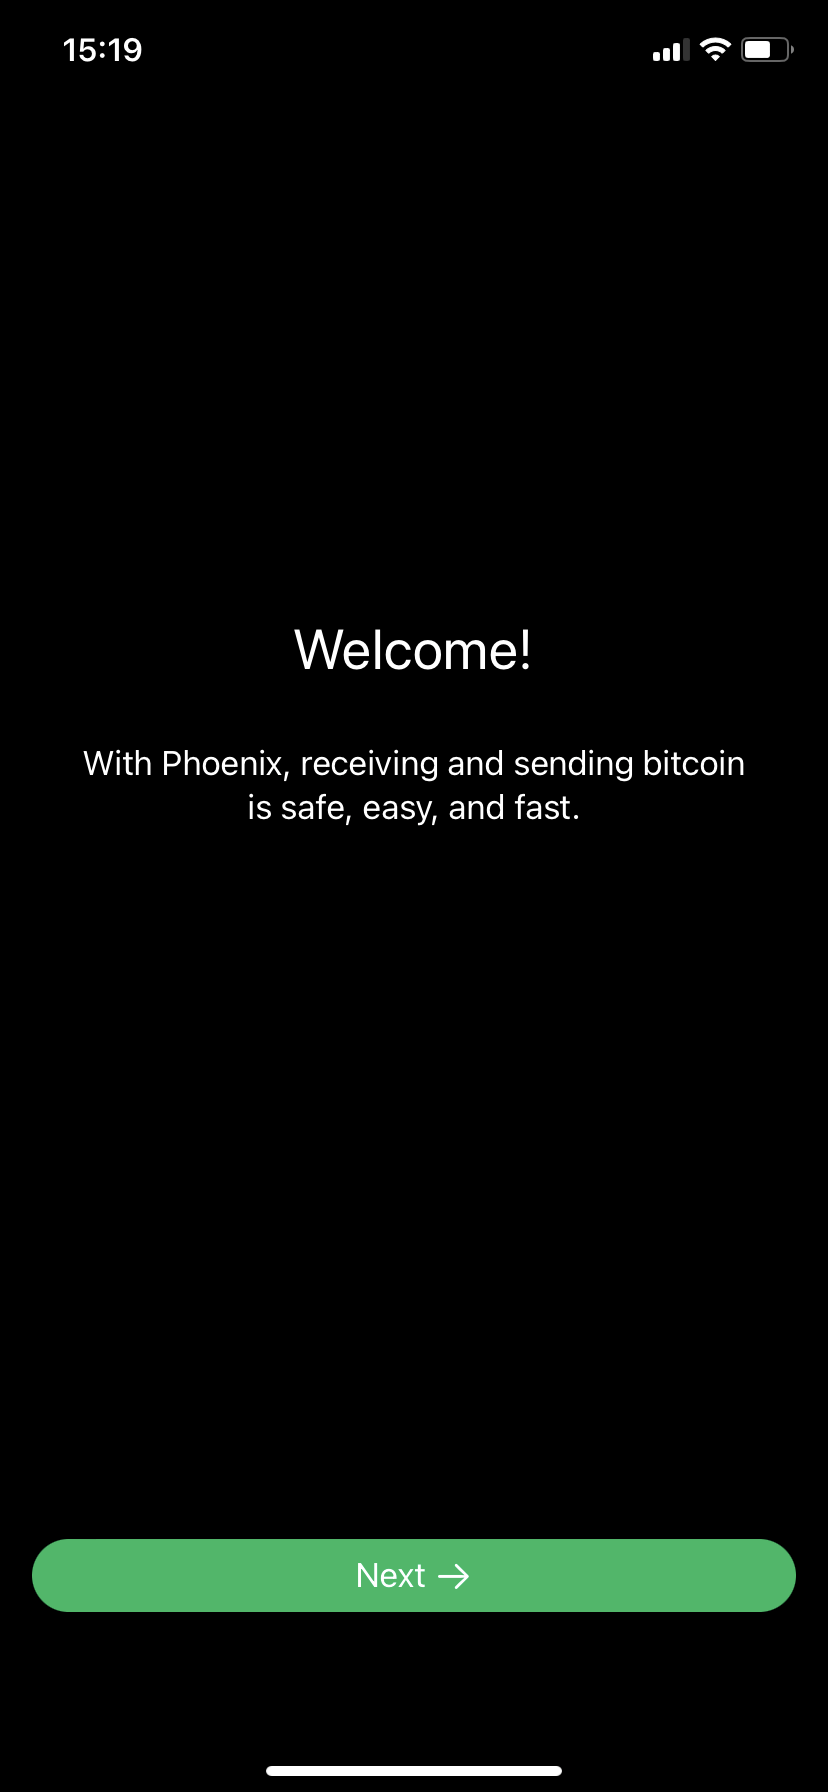 How To Get Started With Phoenix Wallet Step 2